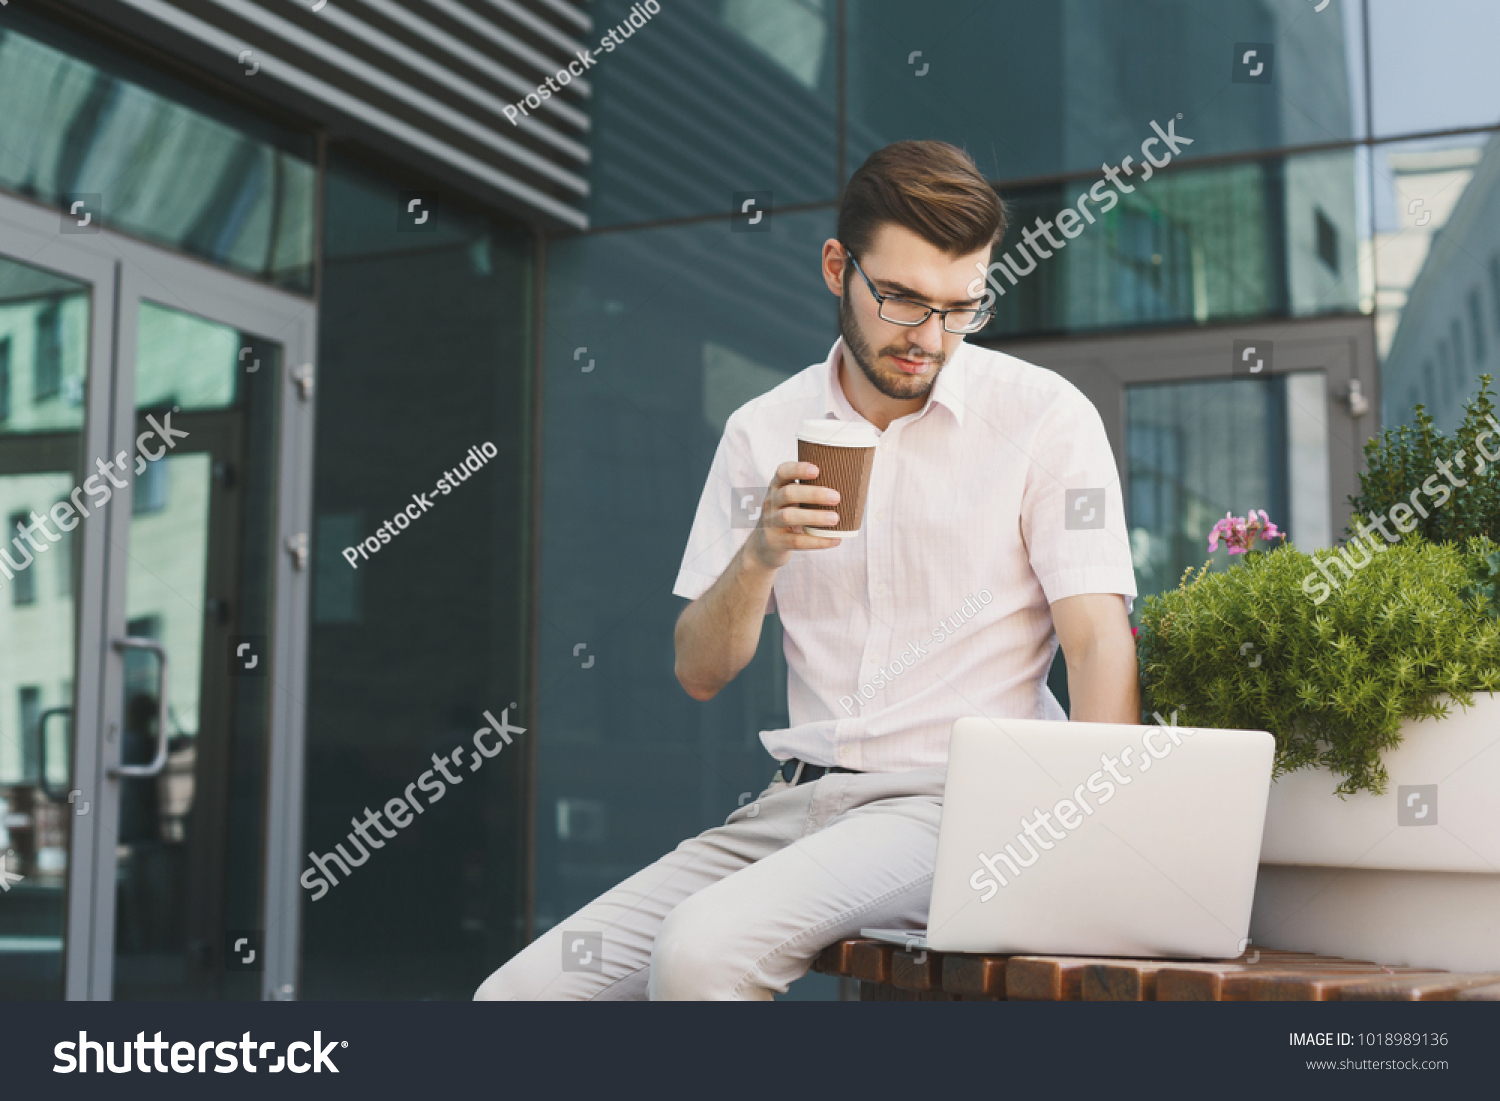 Serious businessman working on laptop. Young concentrated insurance agent checking email on computer, sitting on stairs outdoors in urban area, copy space #1018989136